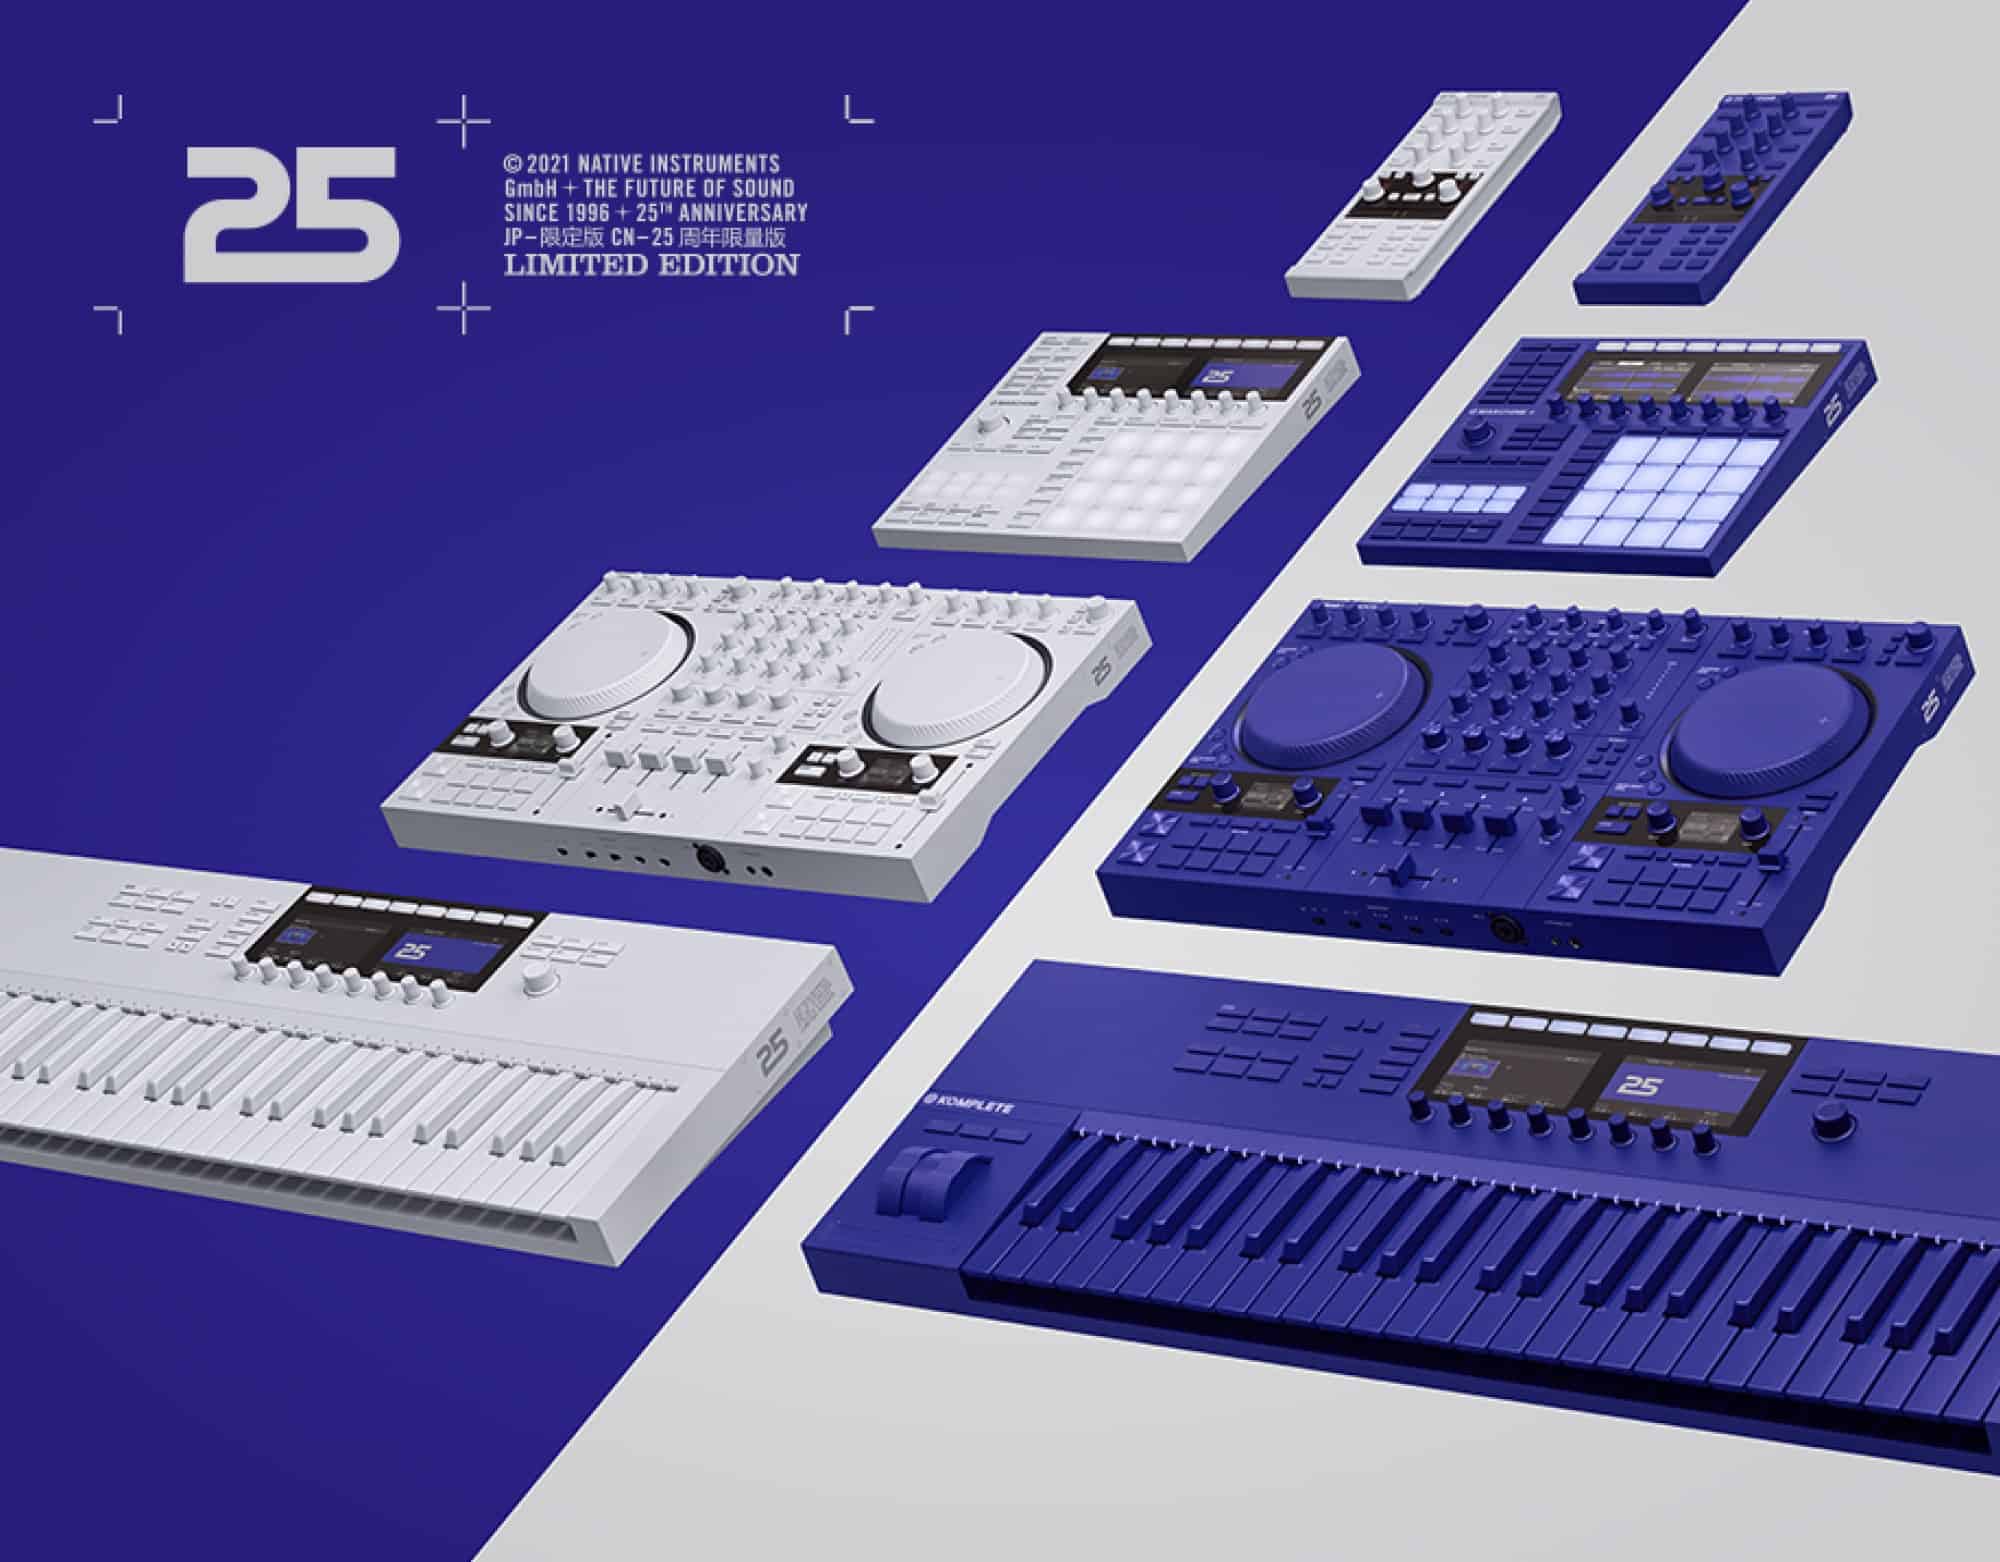 Native Instruments Celebrates 25th Anniversary with Limited Edition Hardware and Free Instrument main